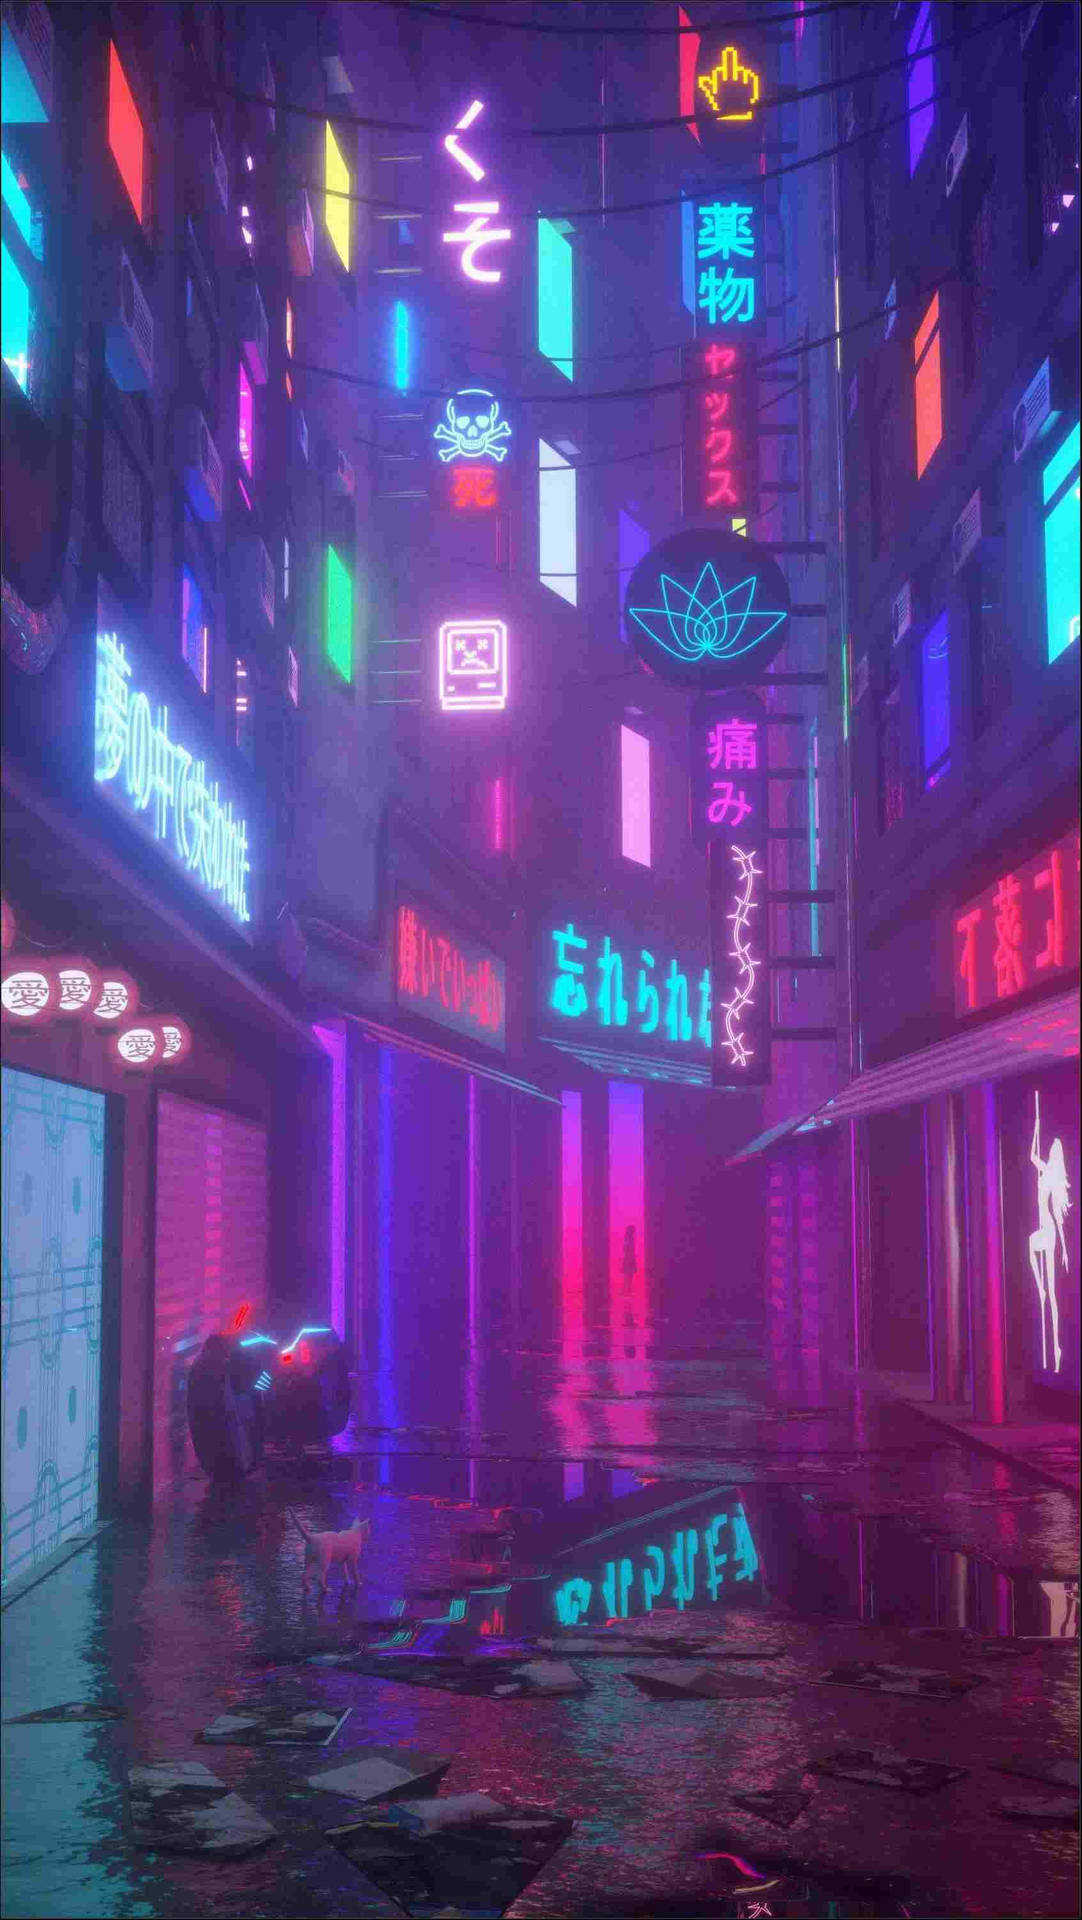 Led Light Chinatown Aesthetic Iphone Xr Wallpaper